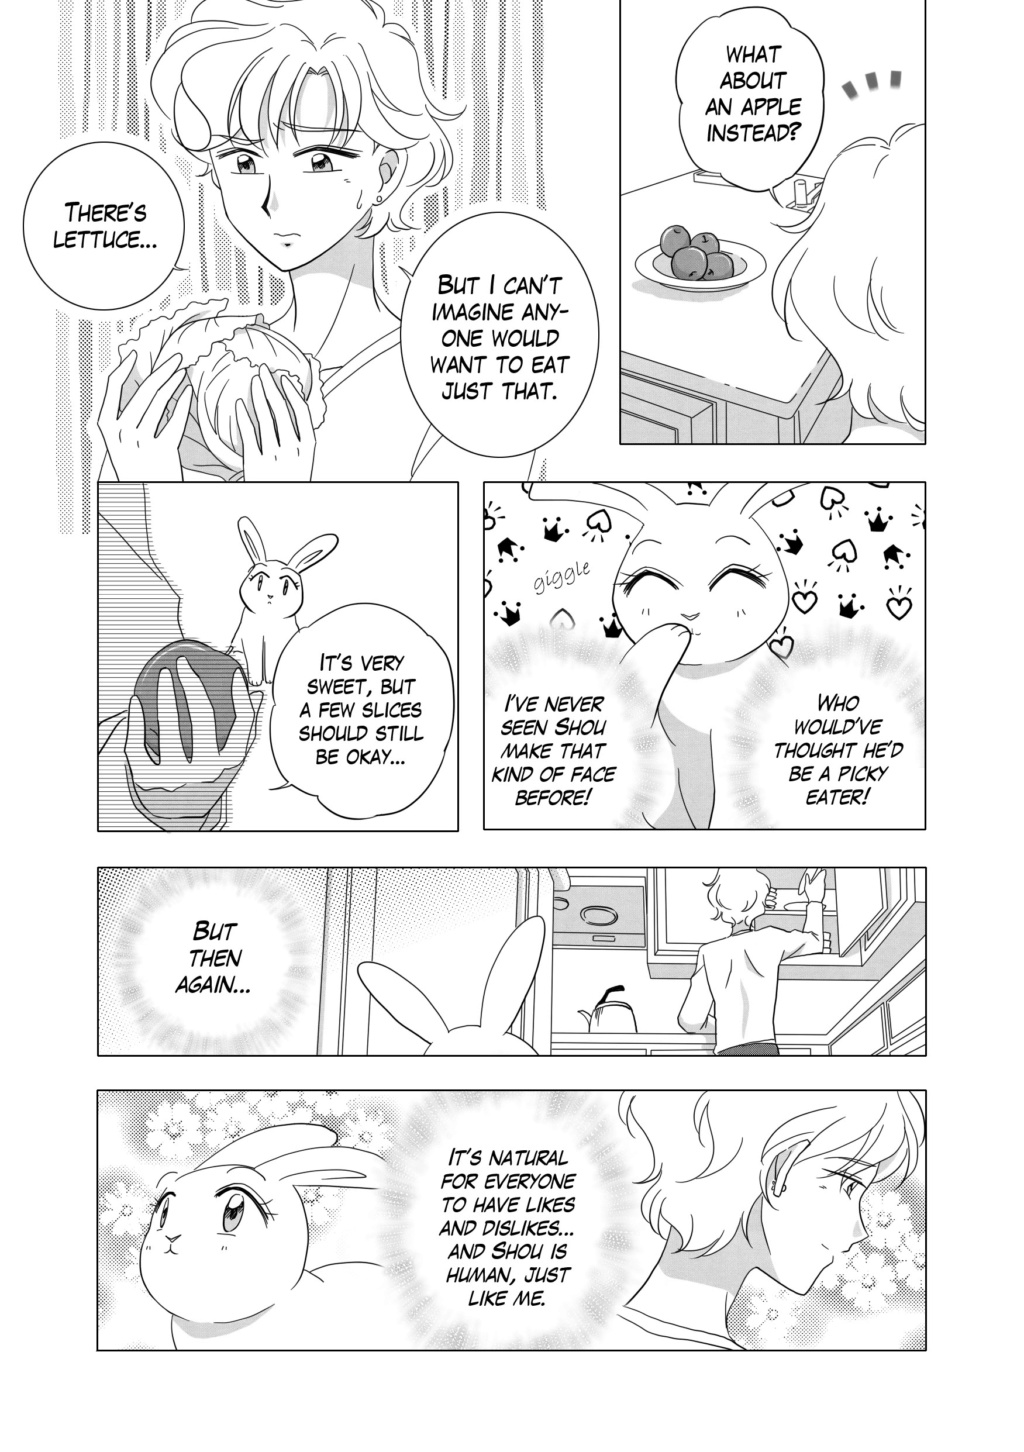 [F] My 30th century Chibi-Usa x Helios doujinshi project: UPDATED 11-25-18 - Page 19 Sbs_pg13